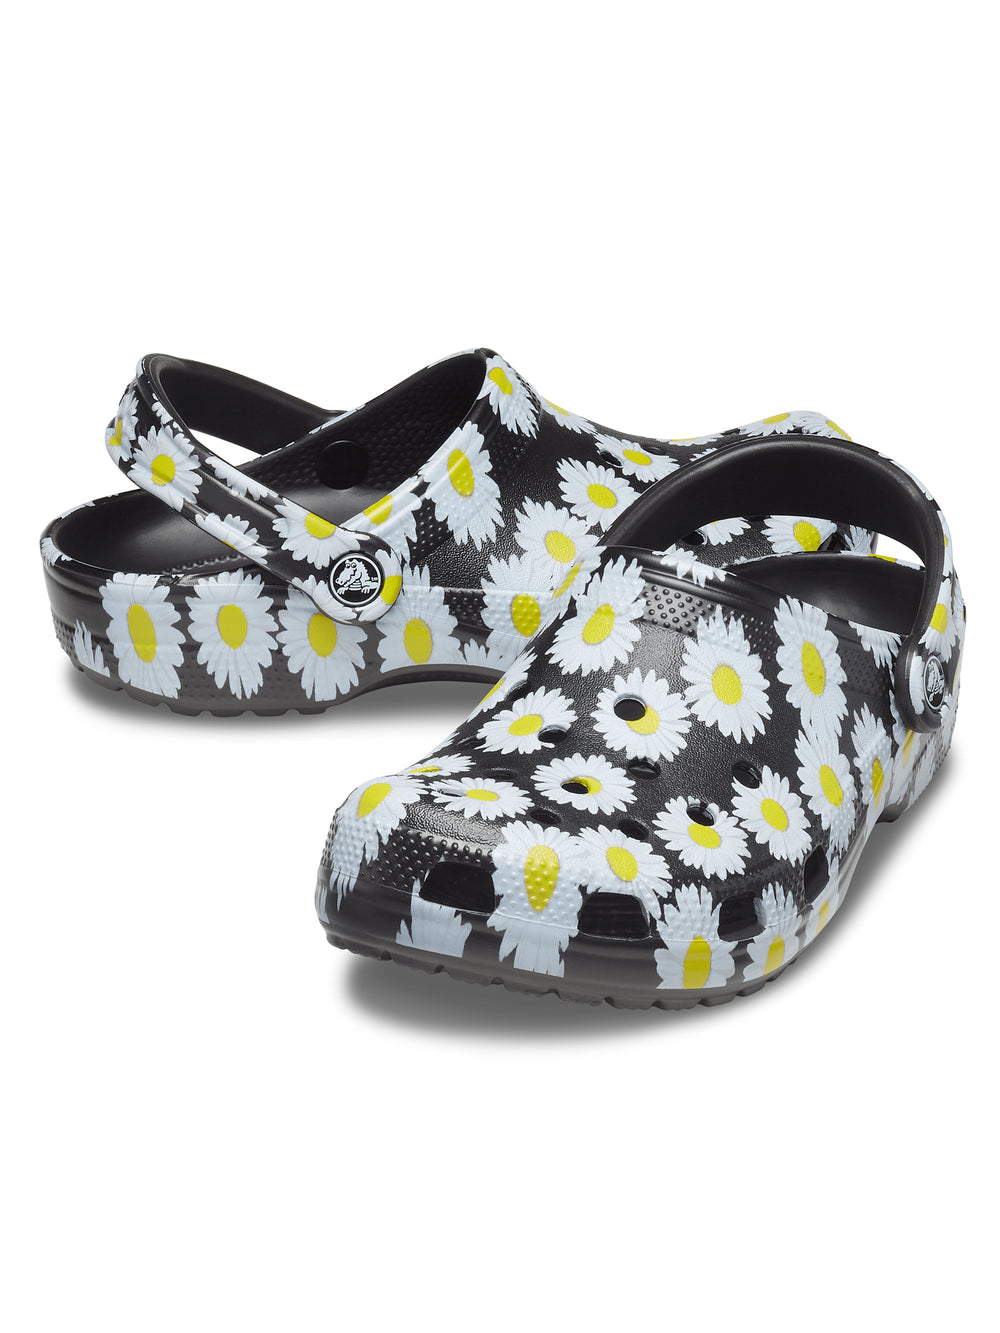 WOMENS CROCS CLASSIC VACAY VIBES CLOGS - CLEARANCE